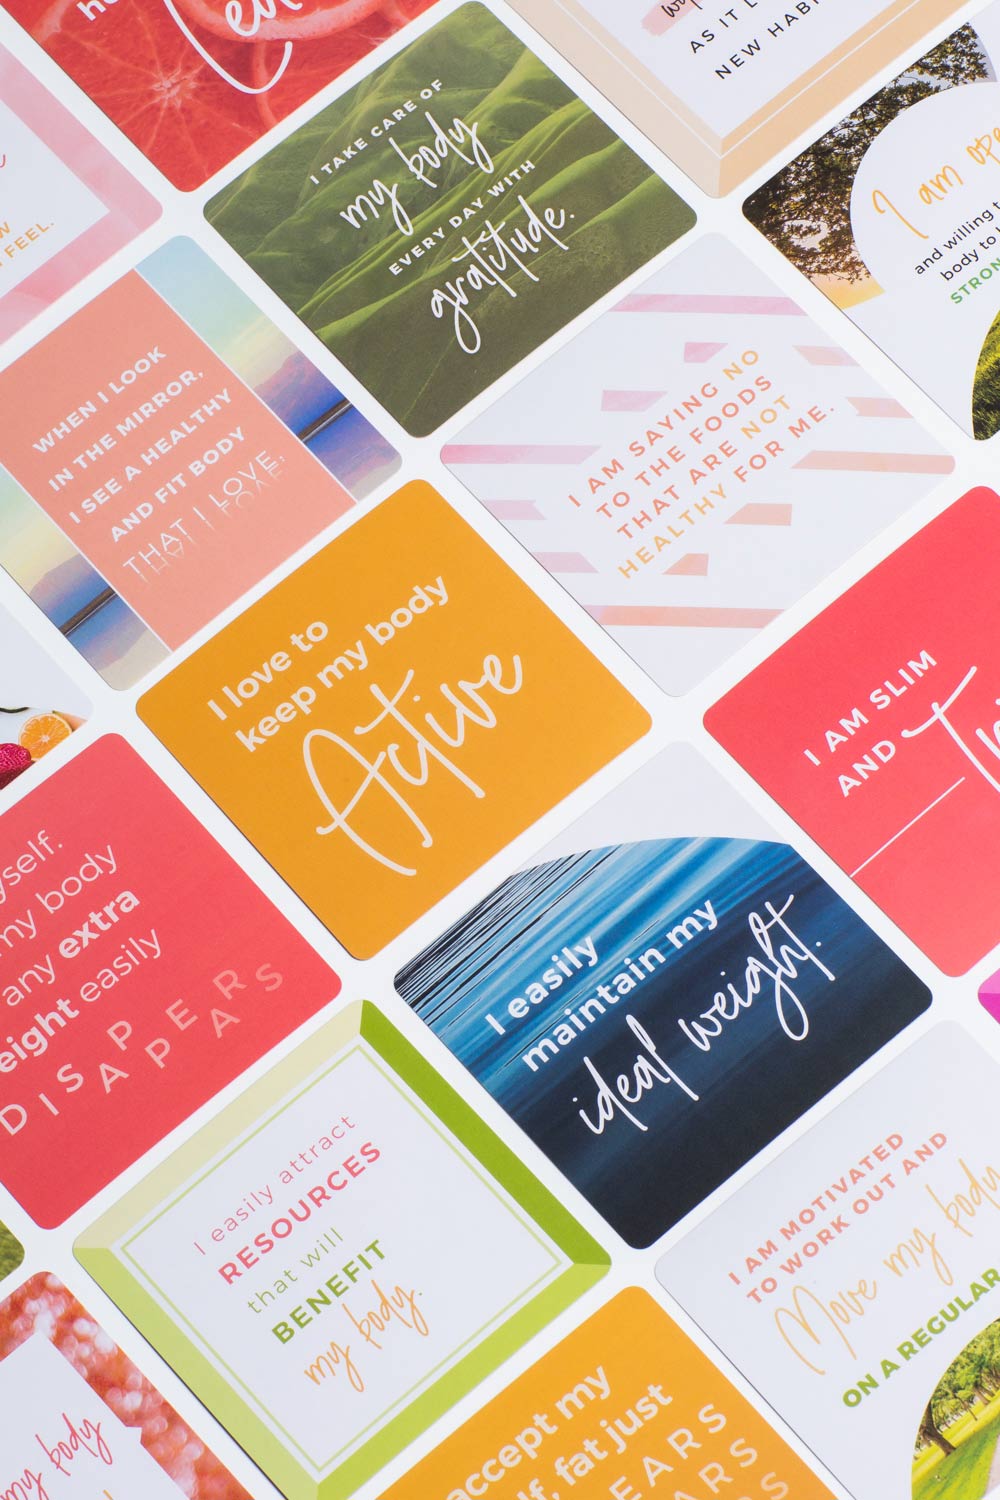 Printable Affirmation Cards. Motivational, Inspirational Quotes